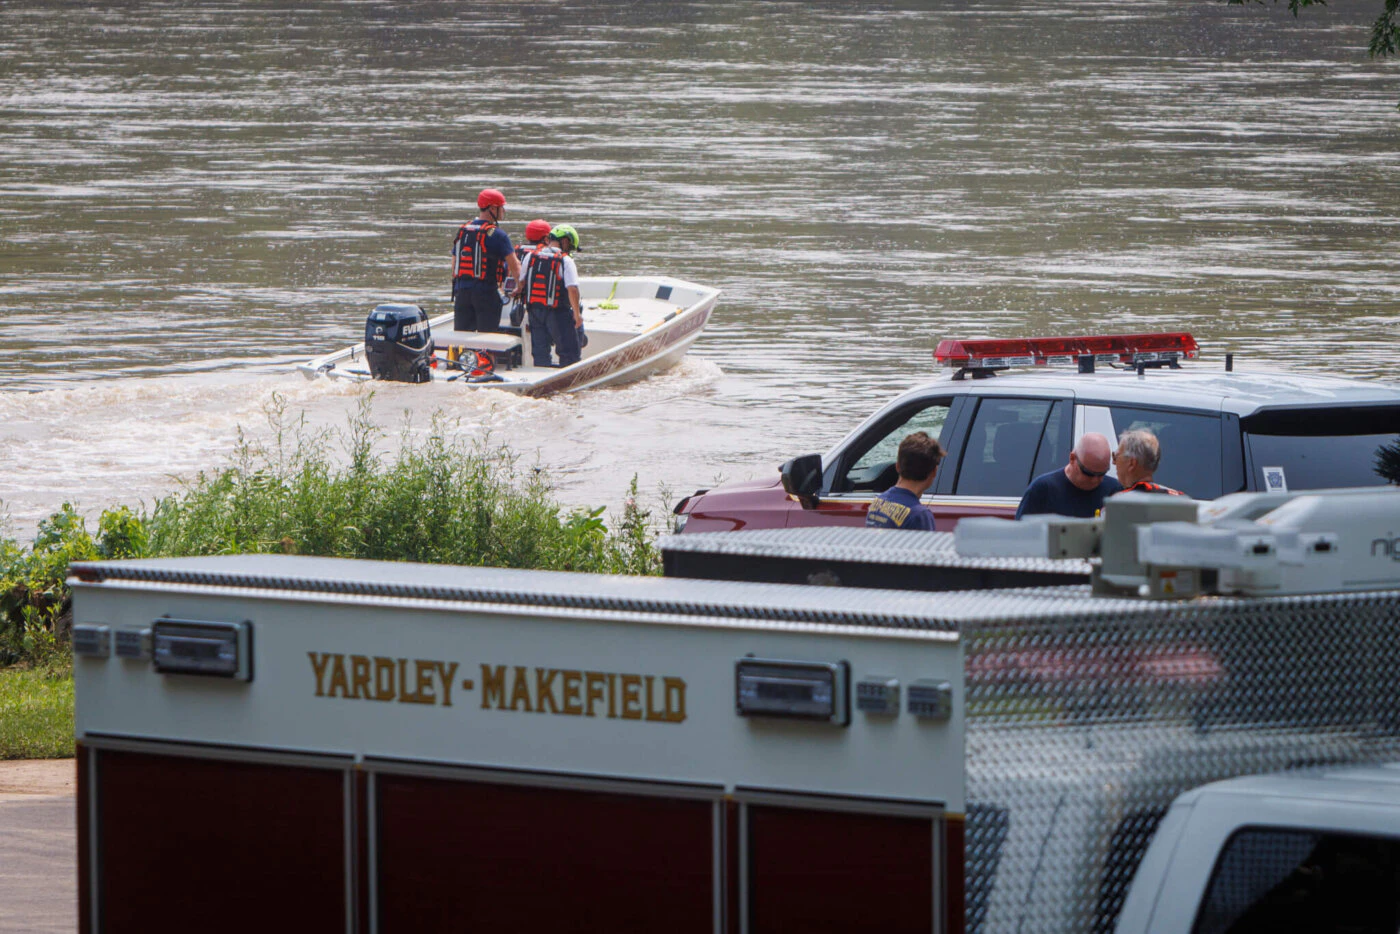 FILE - Yardley Makefield Marine Rescue leaves the Yardley boat ramp heading down the Delaware River on  July 17, 2023, in Yardley, Pa. The family of a 2-year-old girl swept away along with another child by a flash flood that engulfed their vehicle on a Pennsylvania road is expressing gratitude at the discovery of a body believed to be hers.  The body was found early Friday, July 22,  in the Delaware River near a Philadelphia wastewater treatment plant about 30 miles (50 kilometers) from where Matilda Sheils was carried away, authorities said Friday night. (Alejandro A. Alvarez/The Philadelphia Inquirer via AP, File)